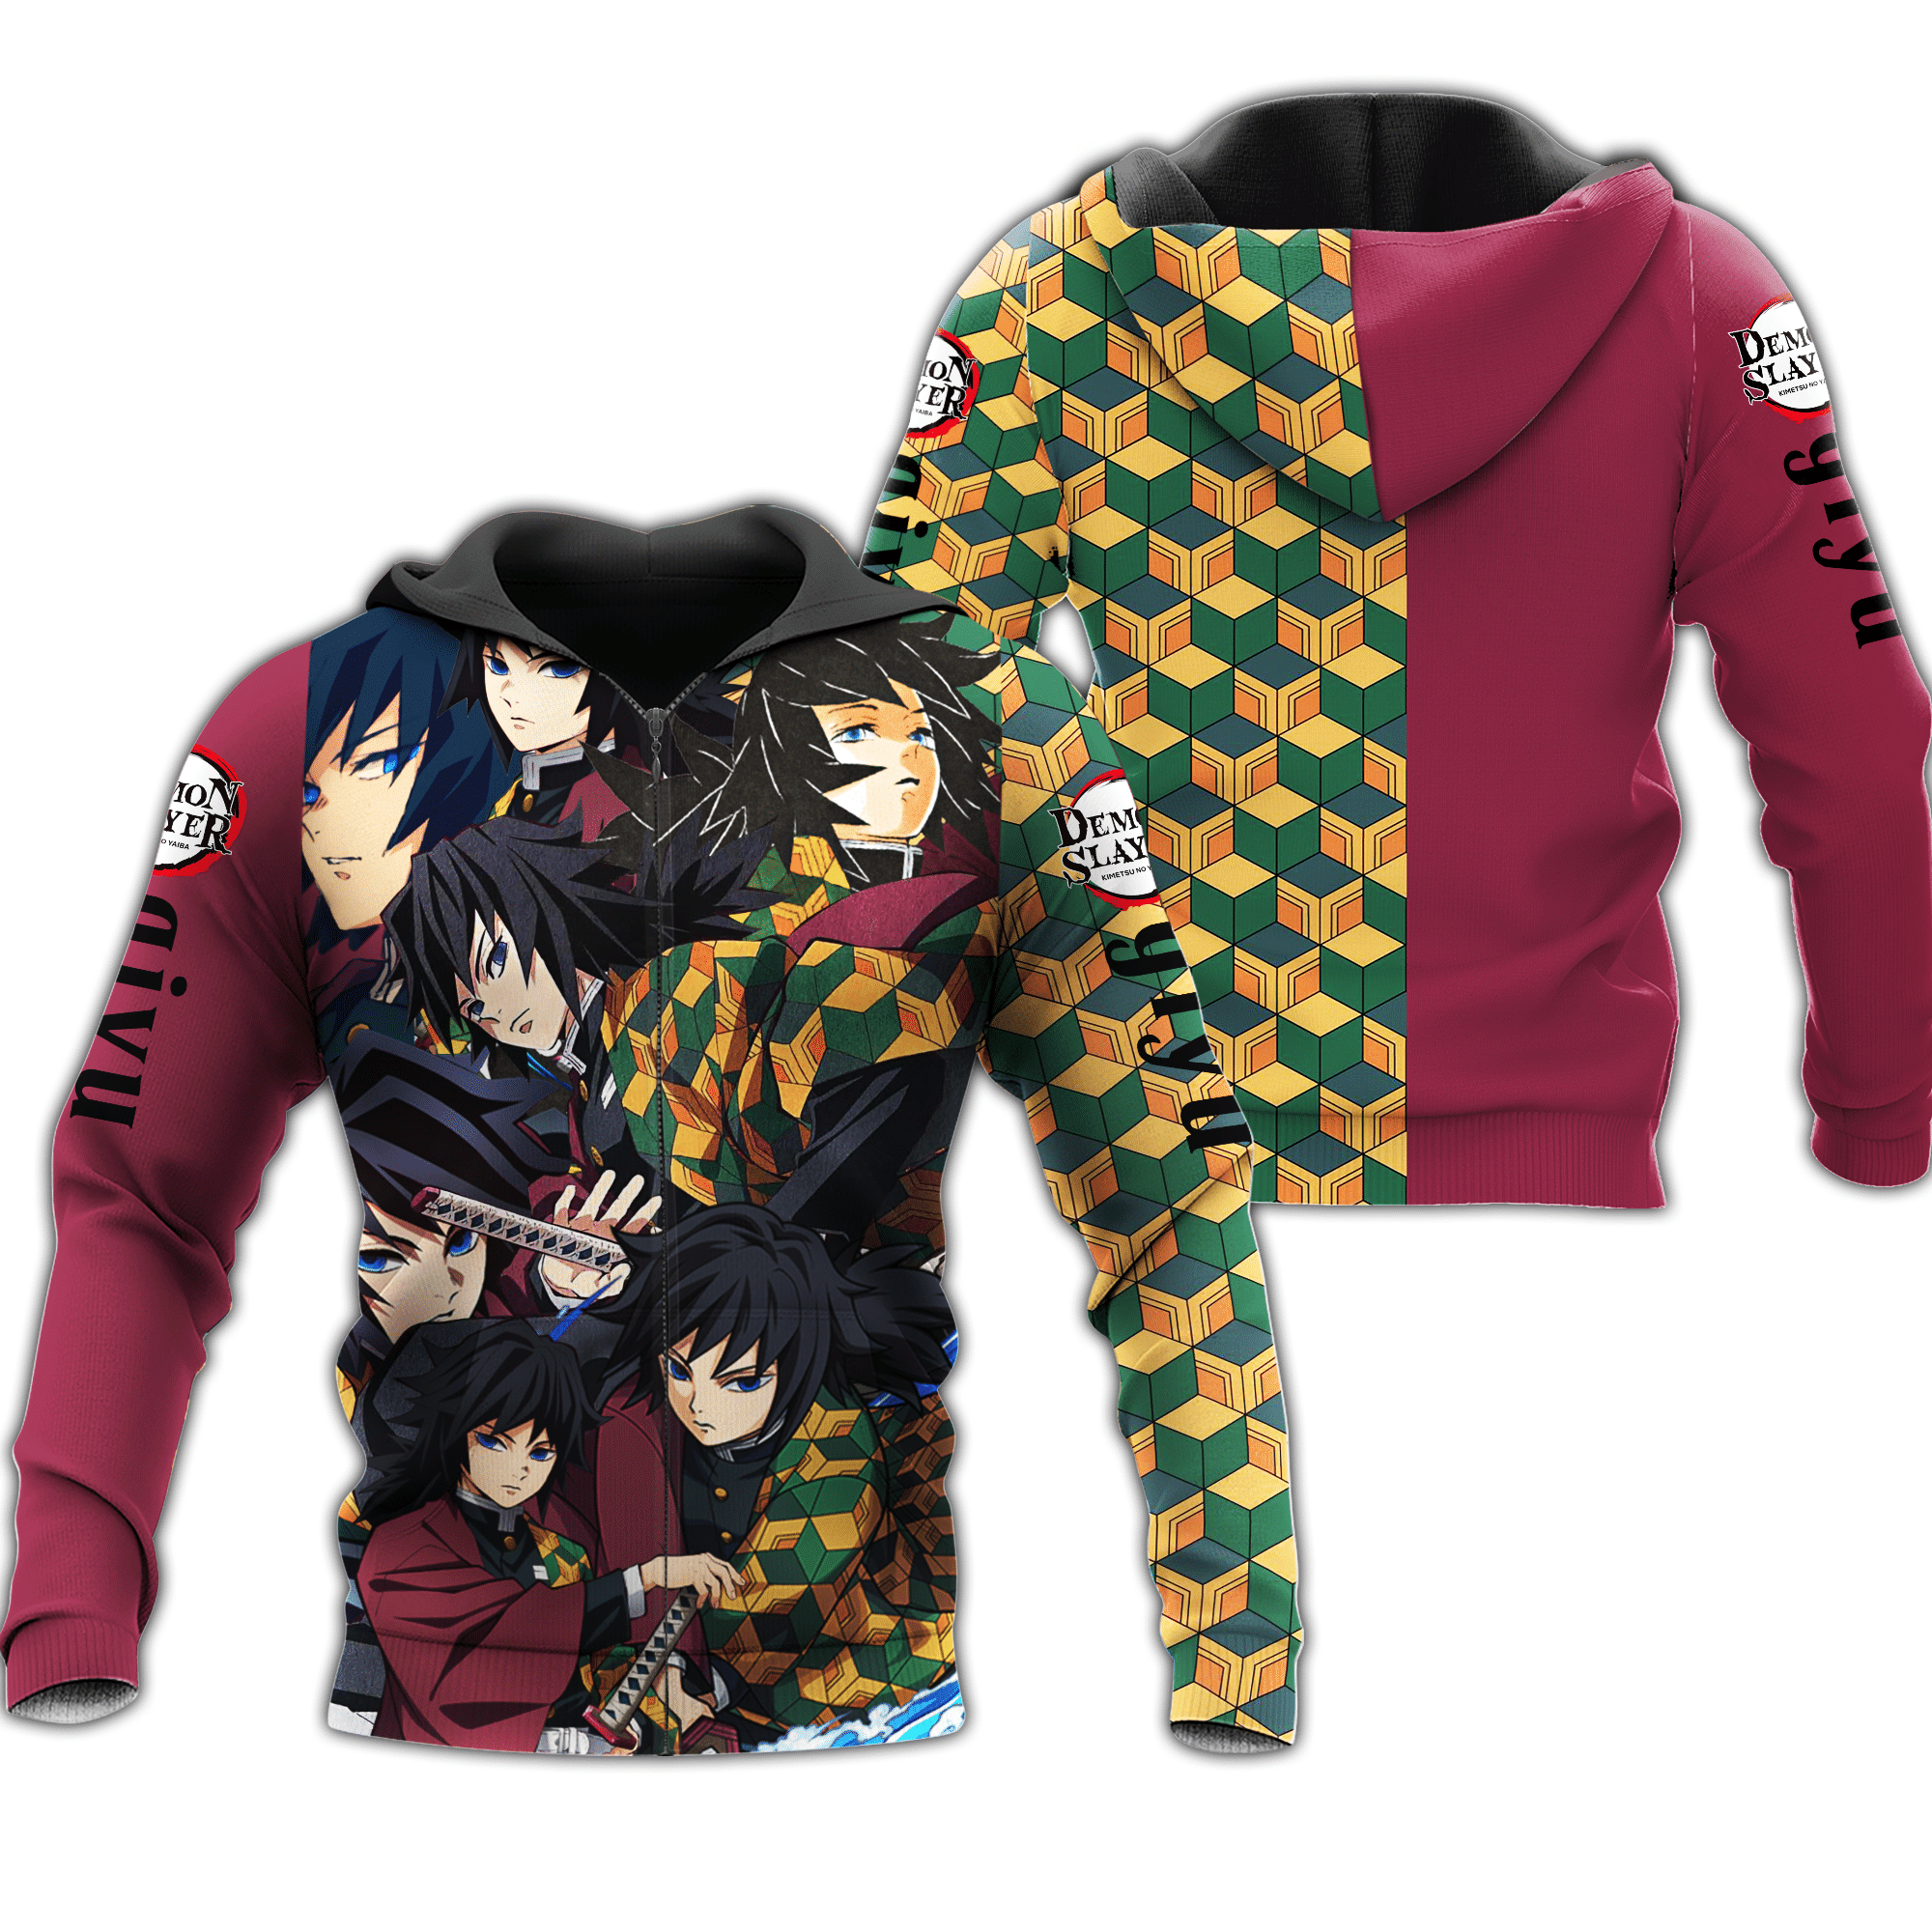 Here are some of my favorite Anime Clothing 179